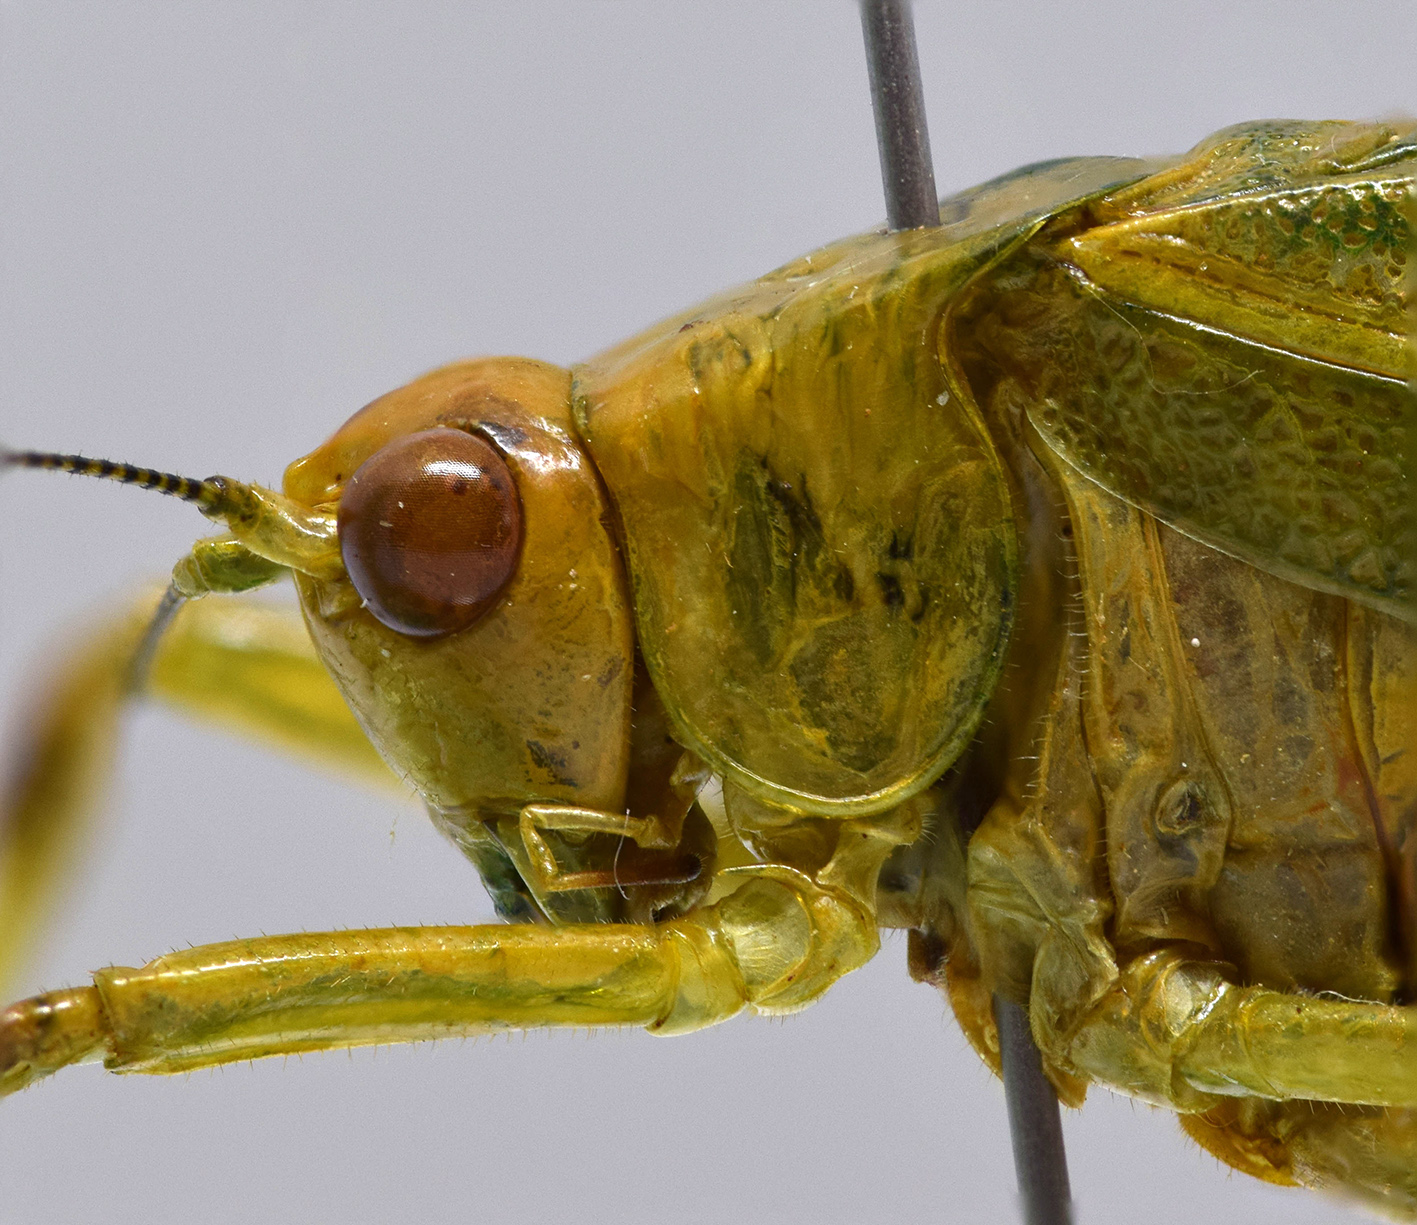 male head and pronotum, lateral view. Depicts CollectionObject 1593136; 4cdae5cf-9663-4664-a62f-de55a7468428, a CollectionObject.